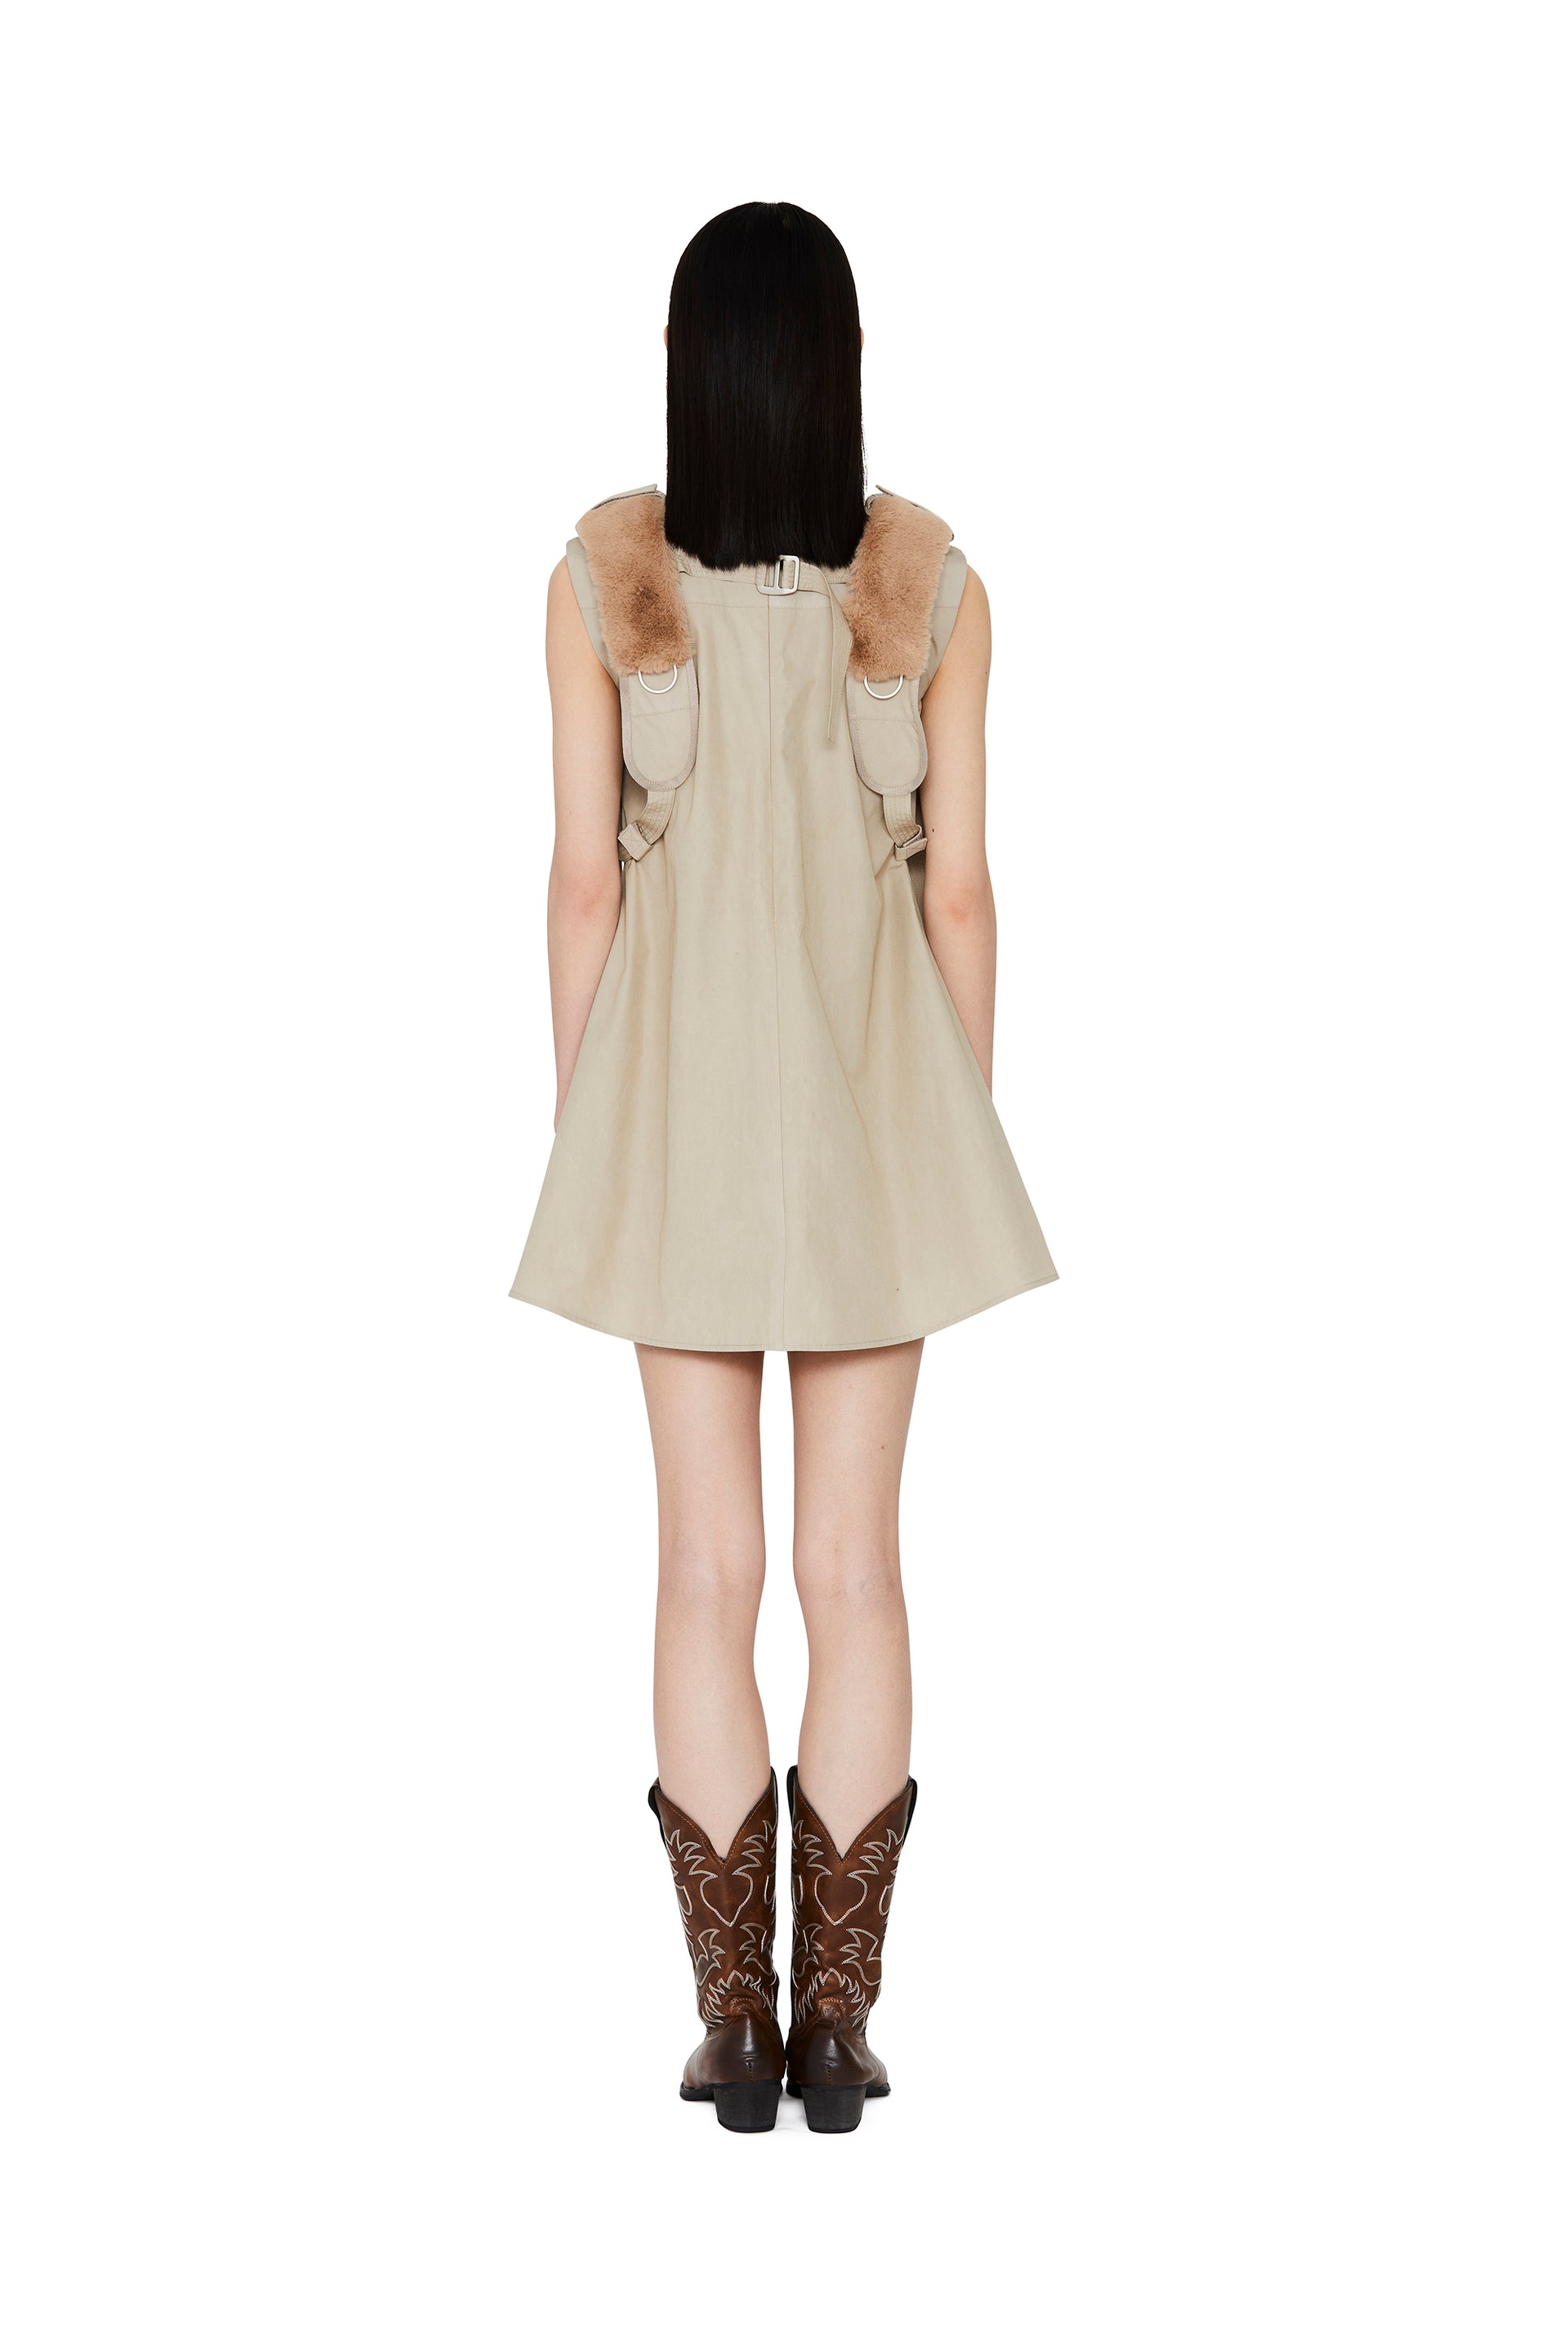 BABYDOLL DRESS WITH FAUX FUR HARNESS - BROWN